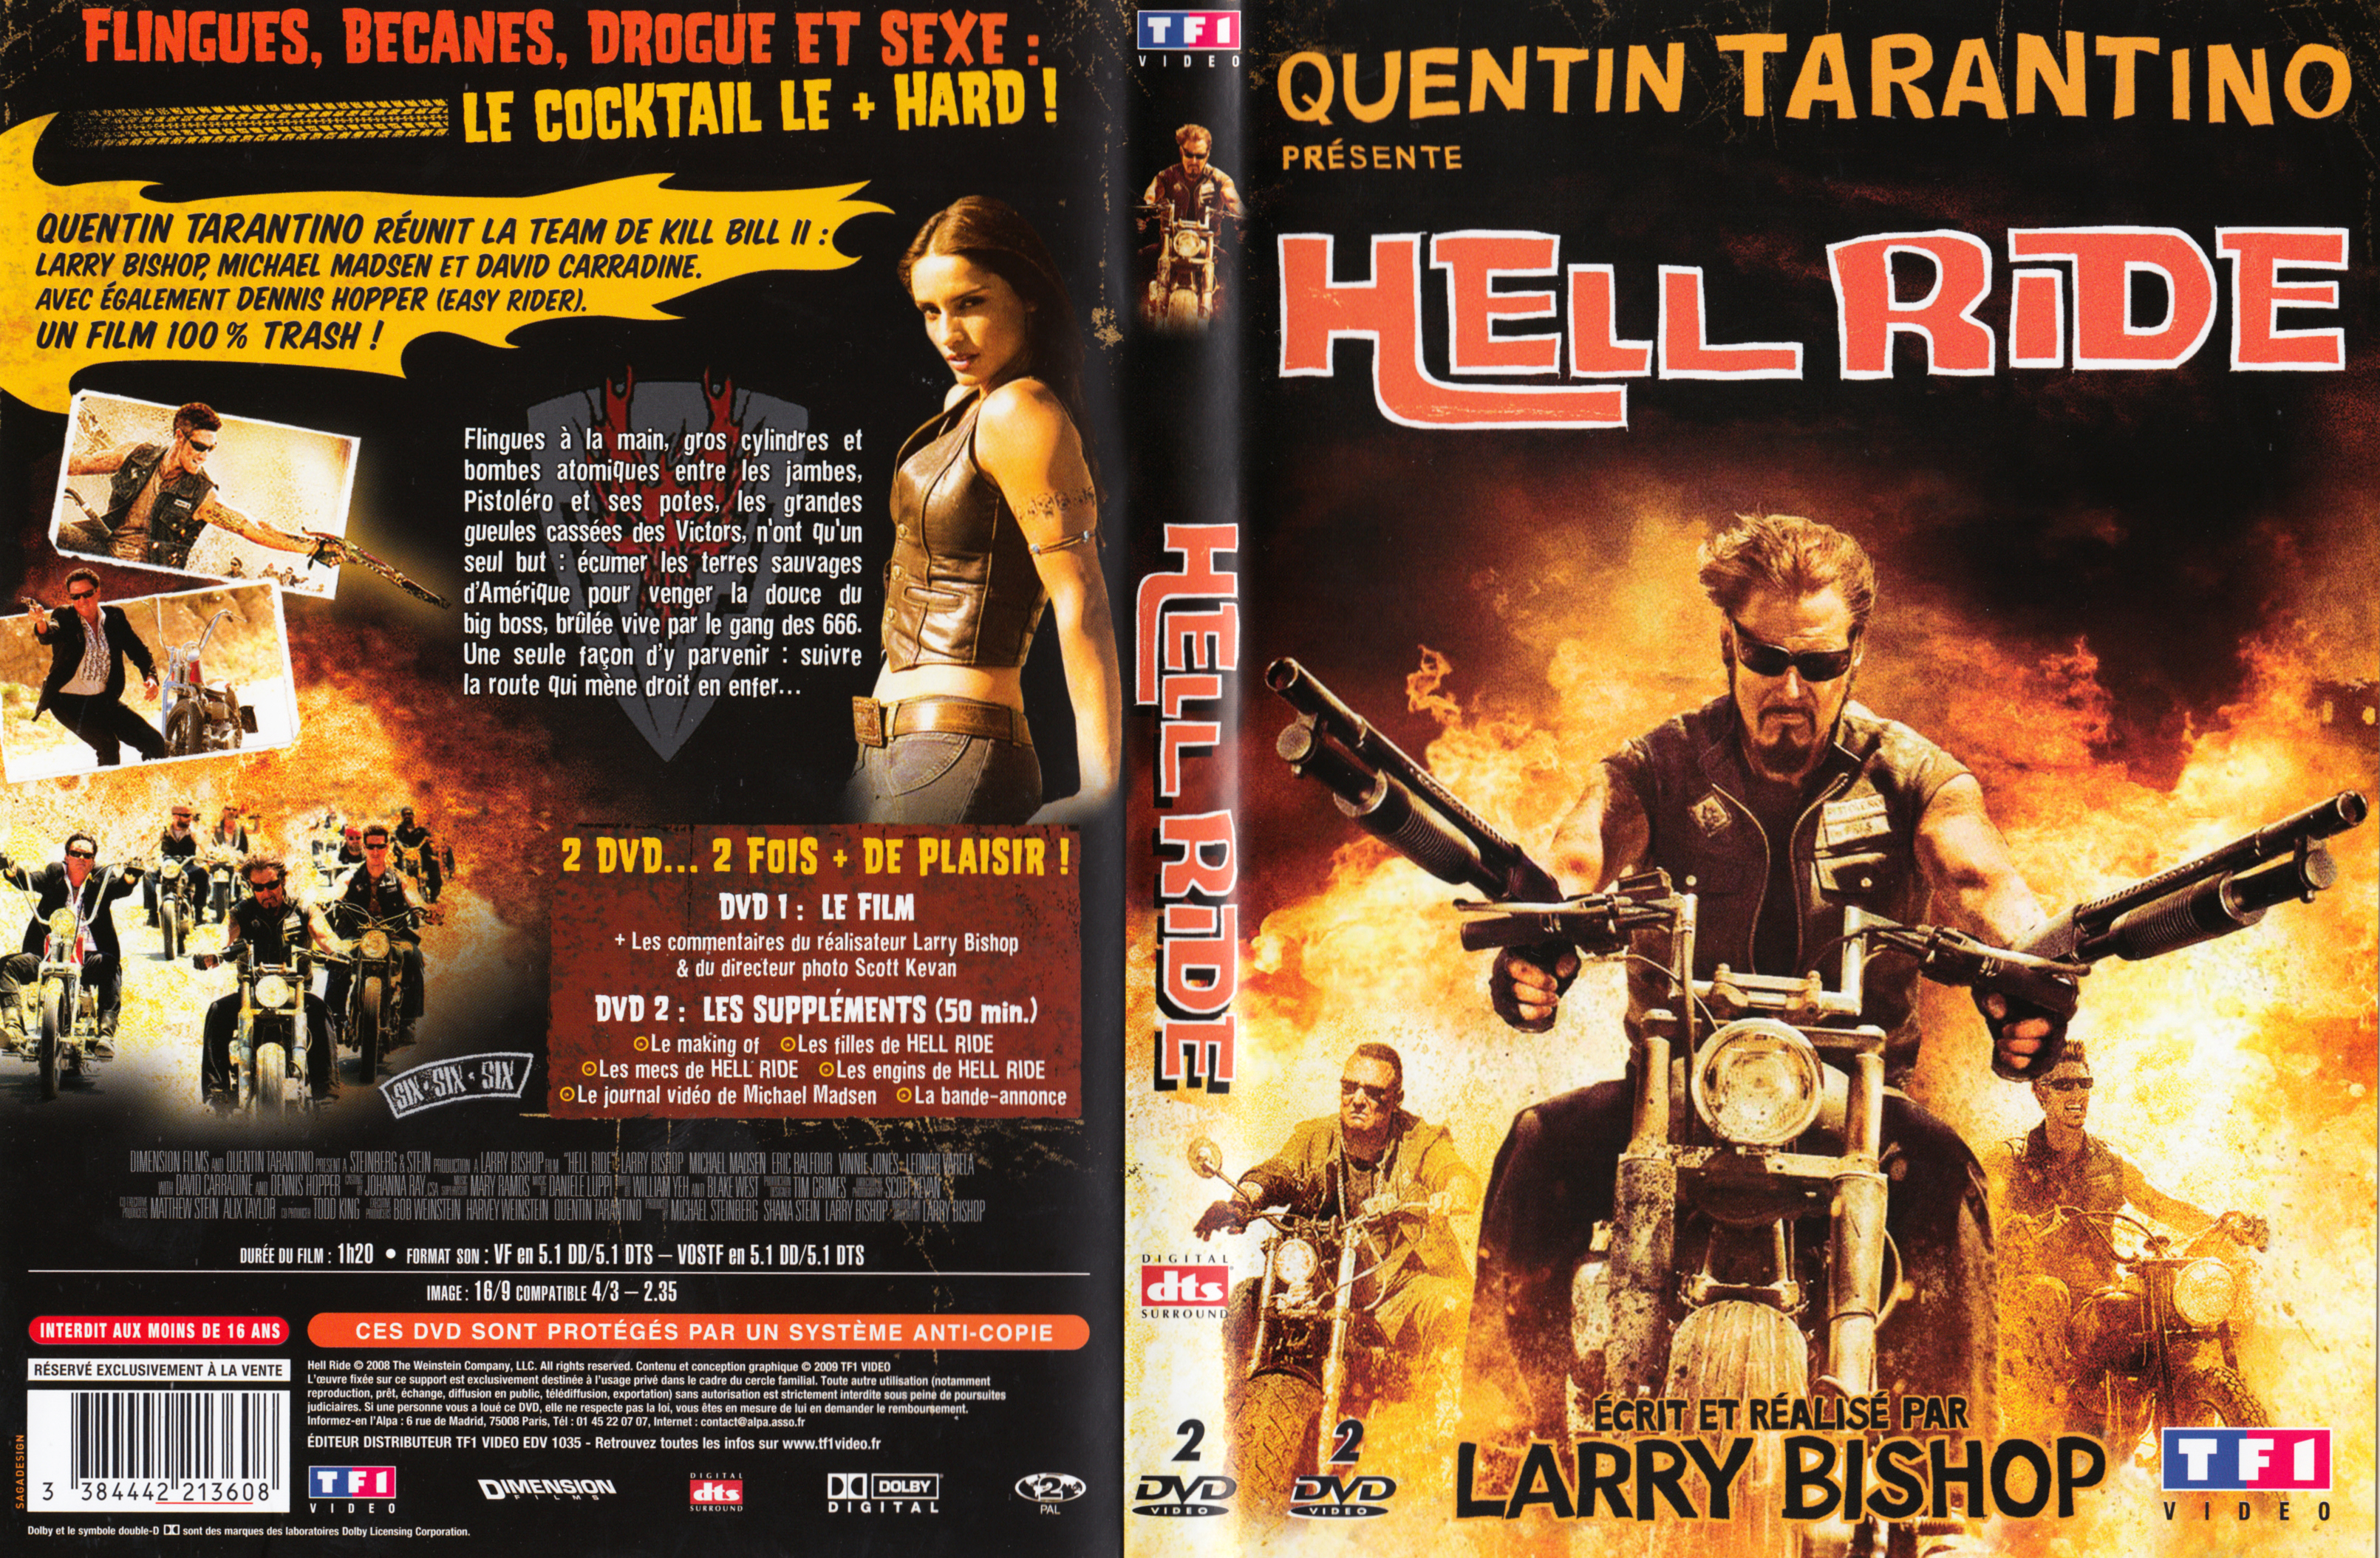 Jaquette DVD Hell Ride